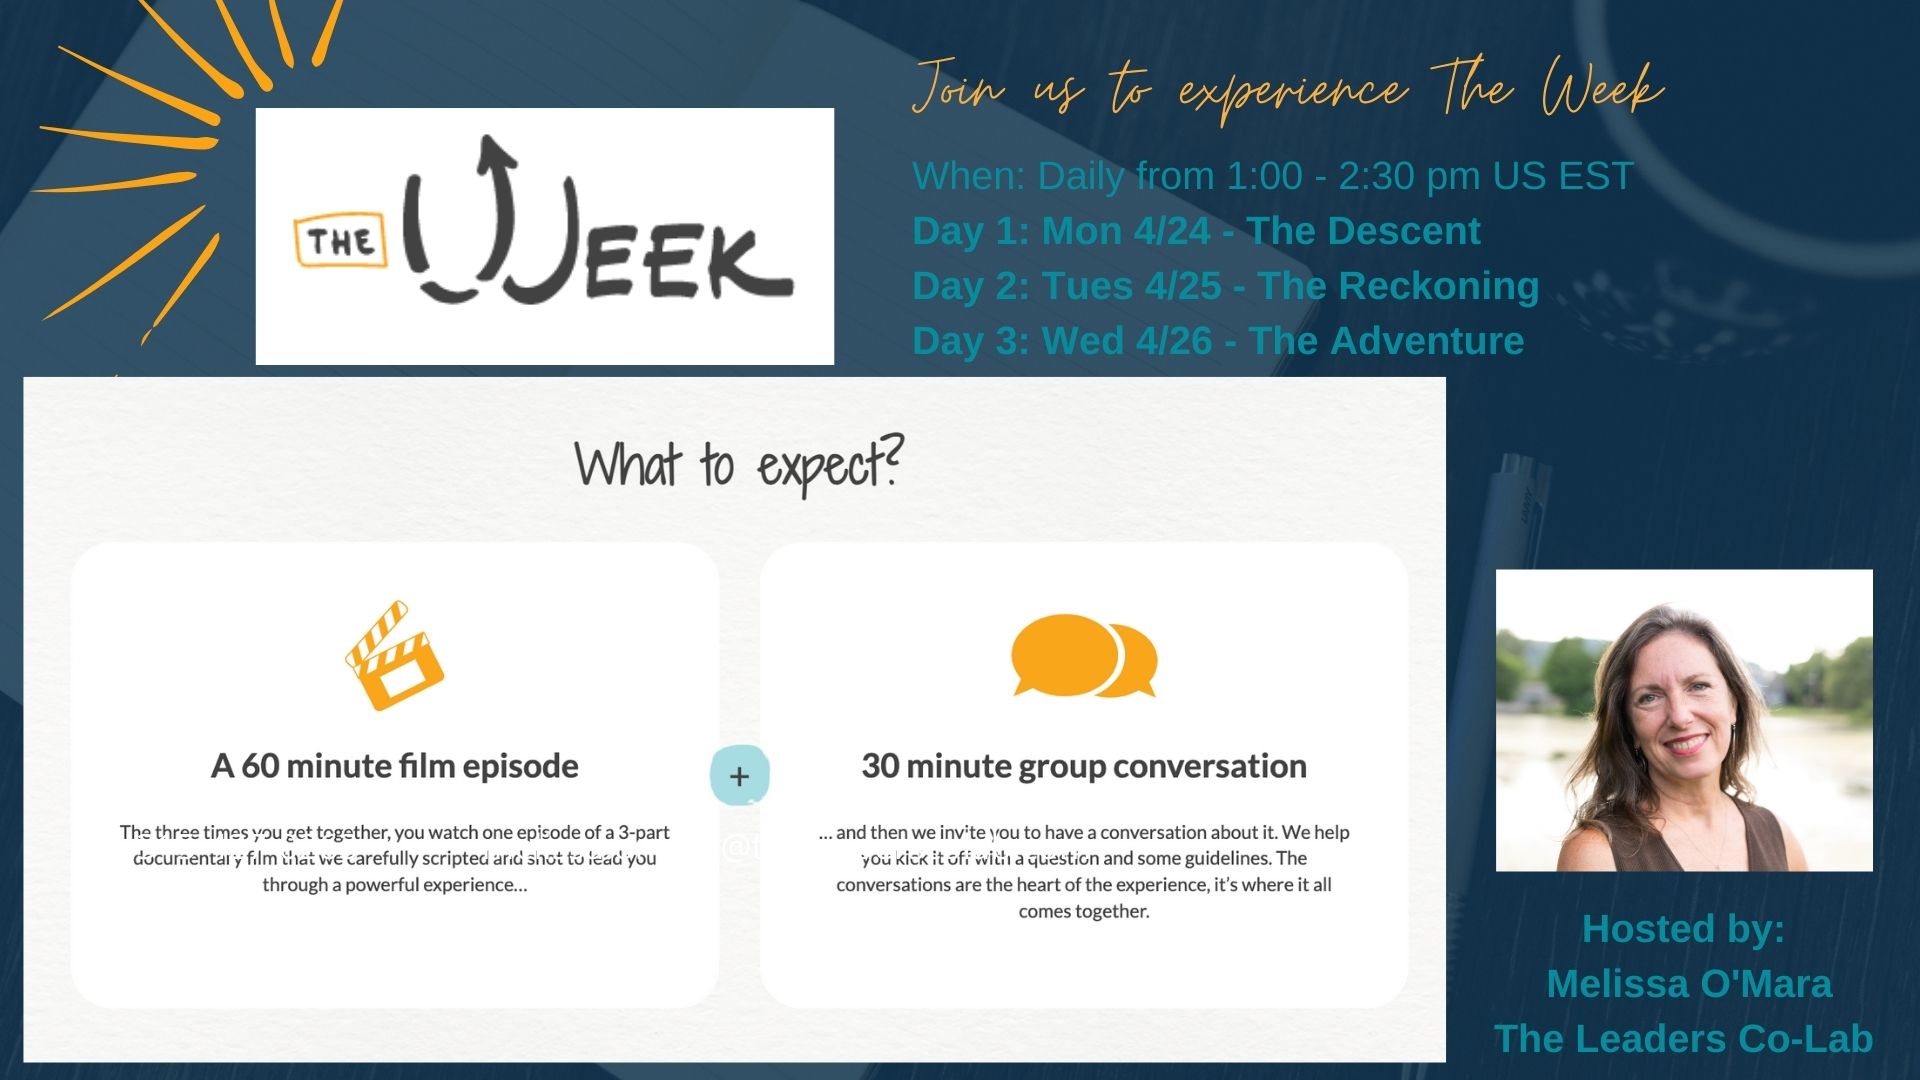 The Week: A Shared Journey & Discussion on the Climate Challenge (3 days, 90 minutes each)